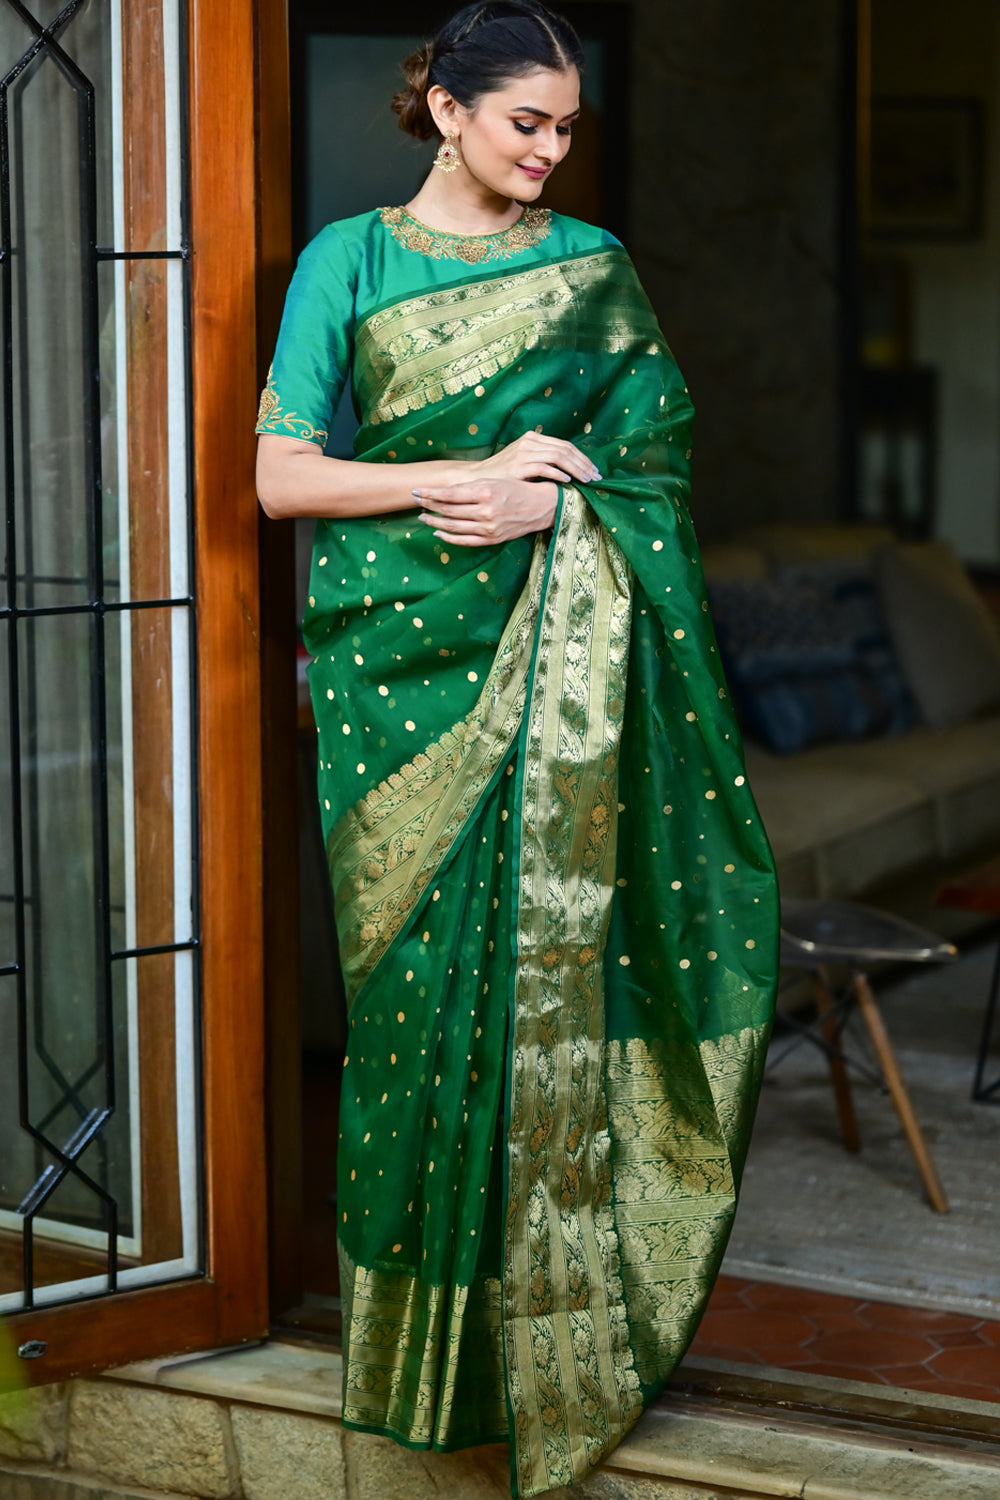 Amazing Teal Blue Color Sequence Saree For Wedding Look – Joshindia